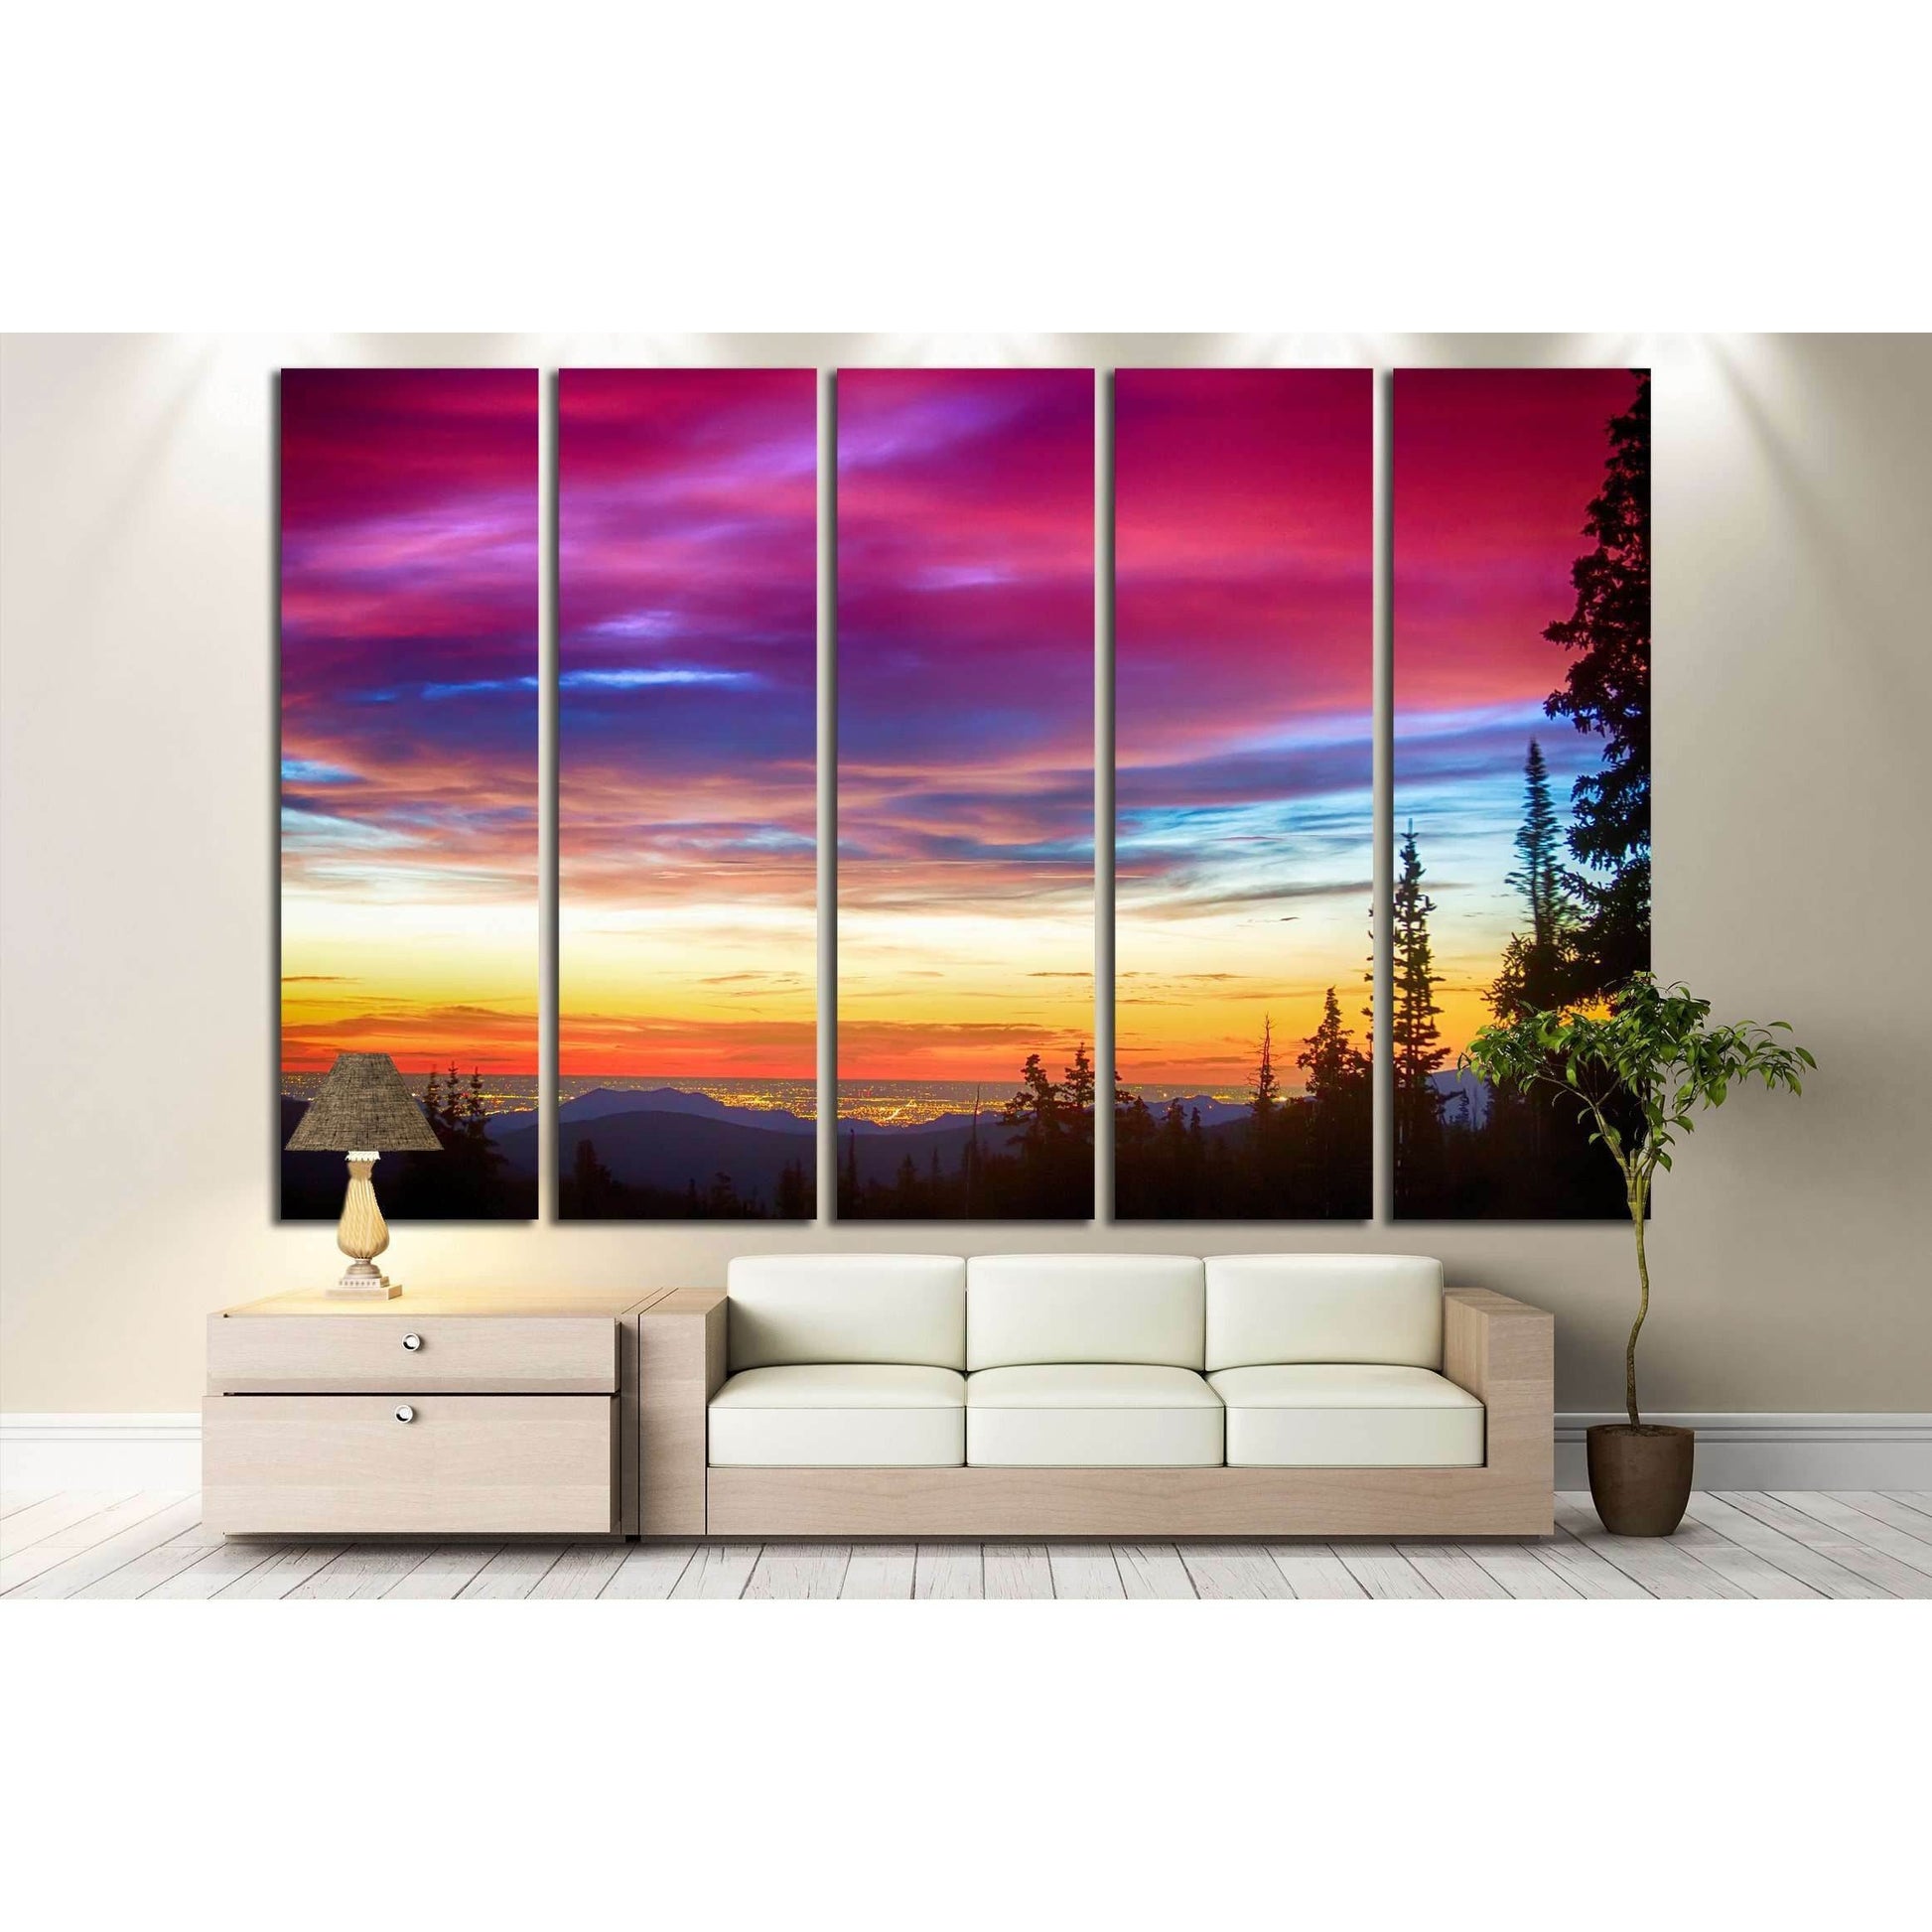 Colorful Sky and Forest Landscape Wall Art for Modern DecorThis canvas print features a stunning sunset with a vibrant palette of colors stretching across the sky, silhouetting a tranquil forest landscape. It brings a dynamic and colorful touch to any spa